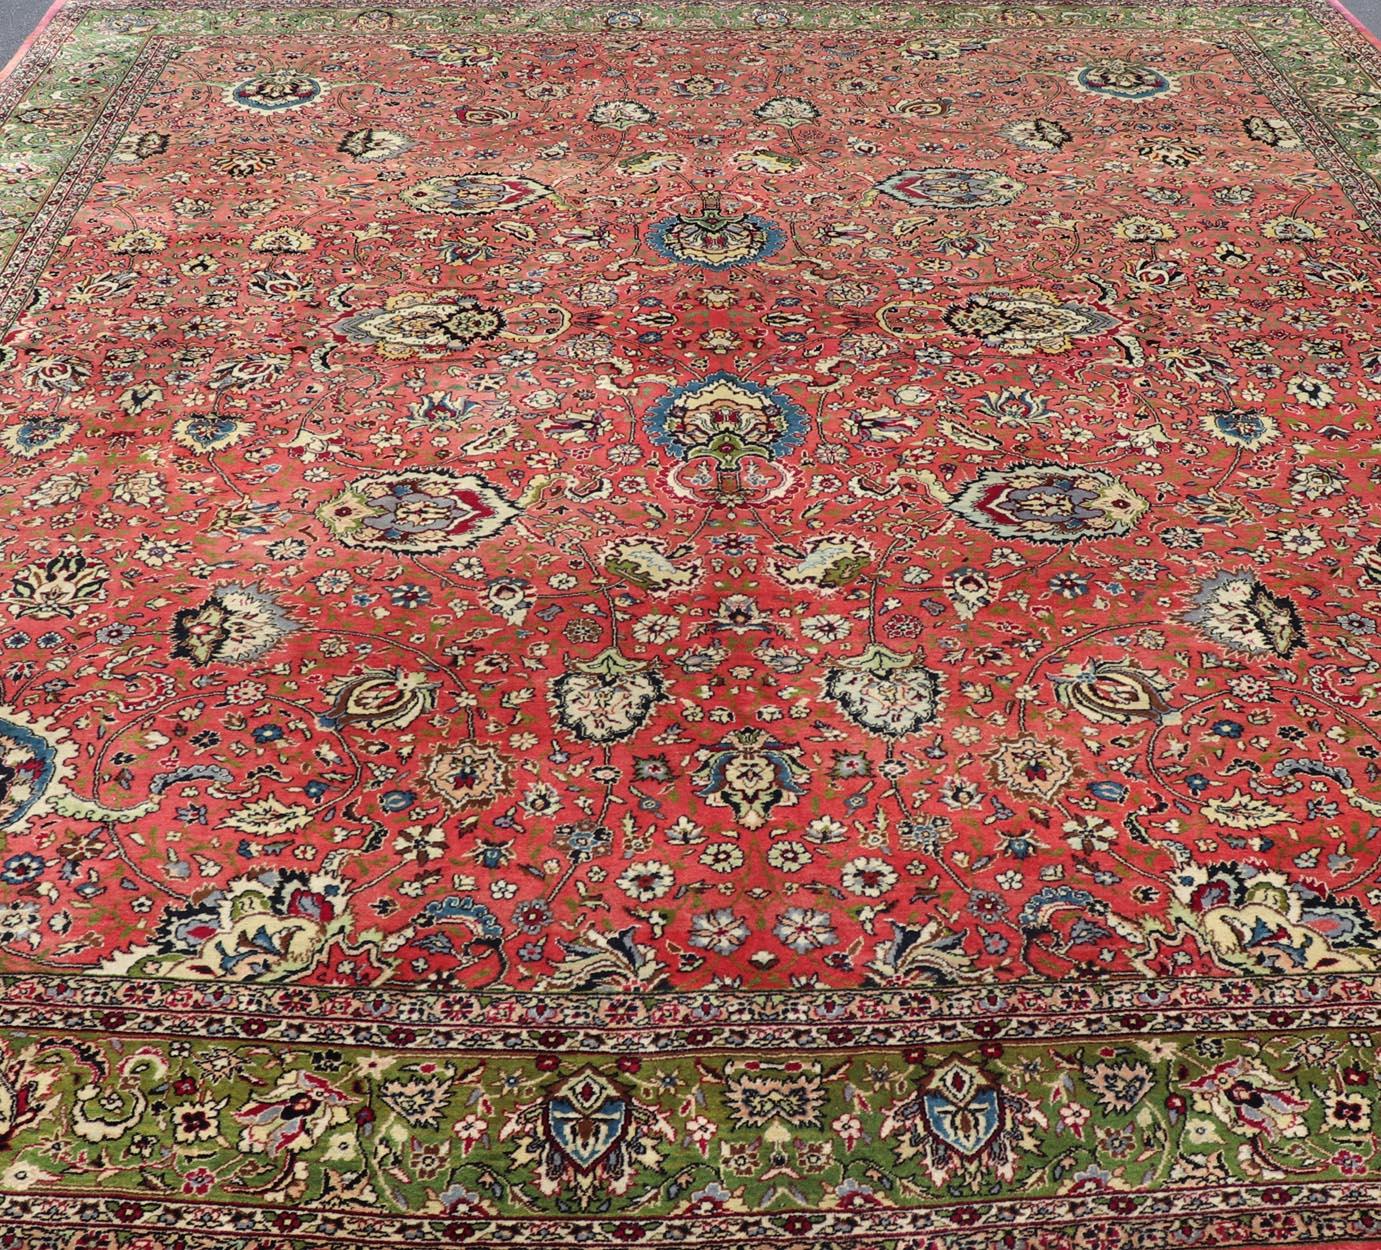 Large Vintage Persian Tabriz Rug with All-Over Design in Cora pink and Acid Green. Keivan Woven Arts / rug X23-0612-444, country of origin / type:  / Tabriz, circa 1950

Measures: 13' x 15'4 

This vintage Squarish size Tabriz carpet features a